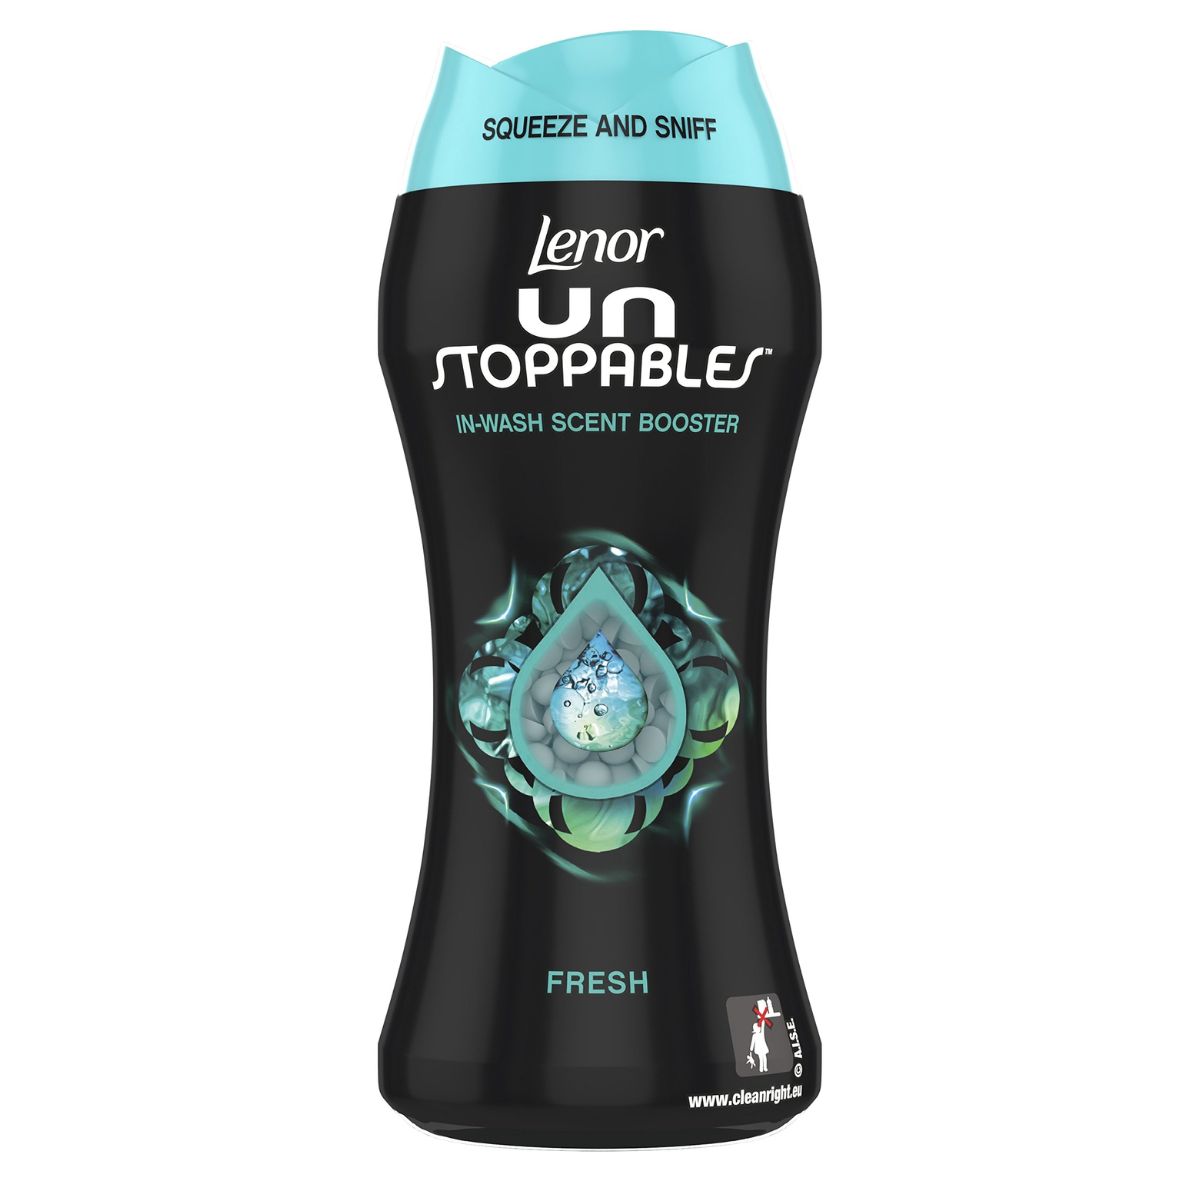 A bottle of Lenor - Unstoppables Fresh In-Wash Scent Booster - 570g.